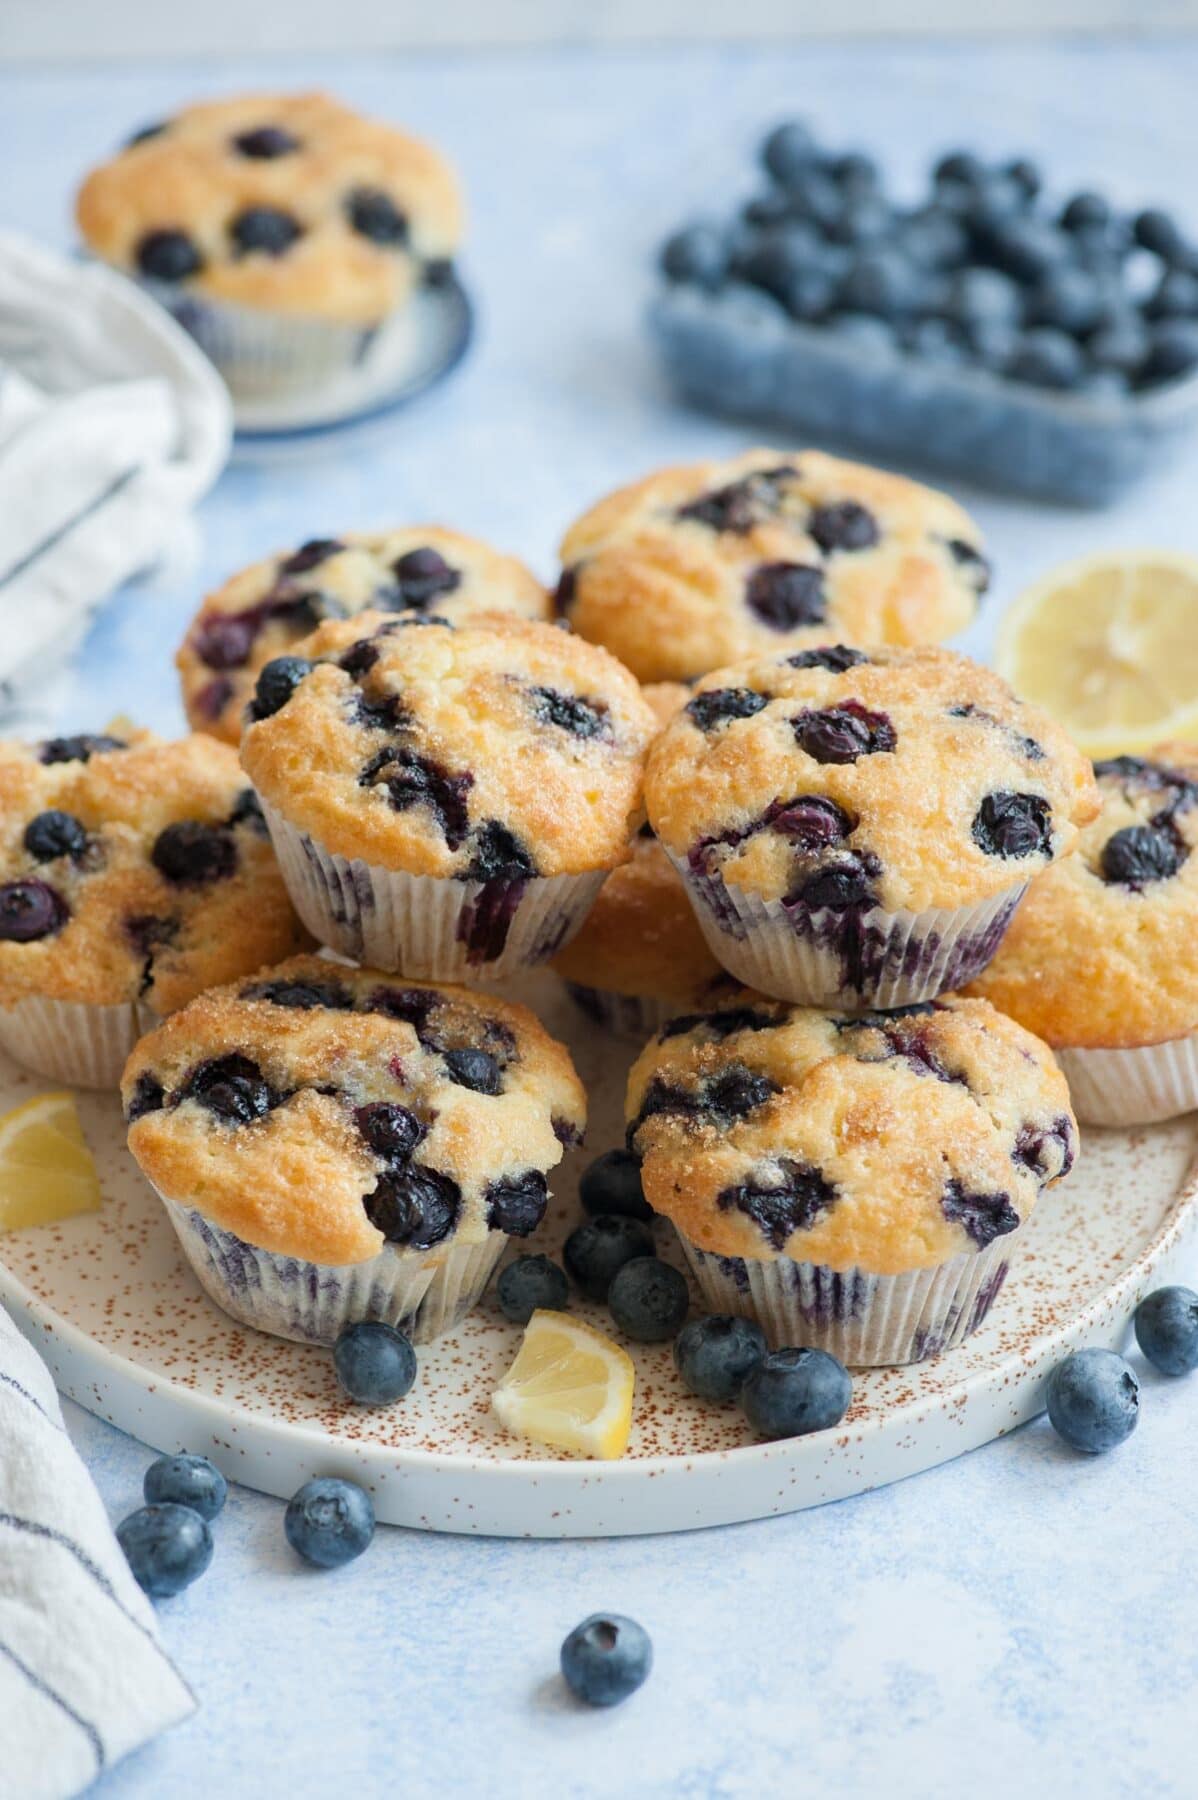 Blueberry muffins on a white plate. Blueberries and lemon slices scattered around.